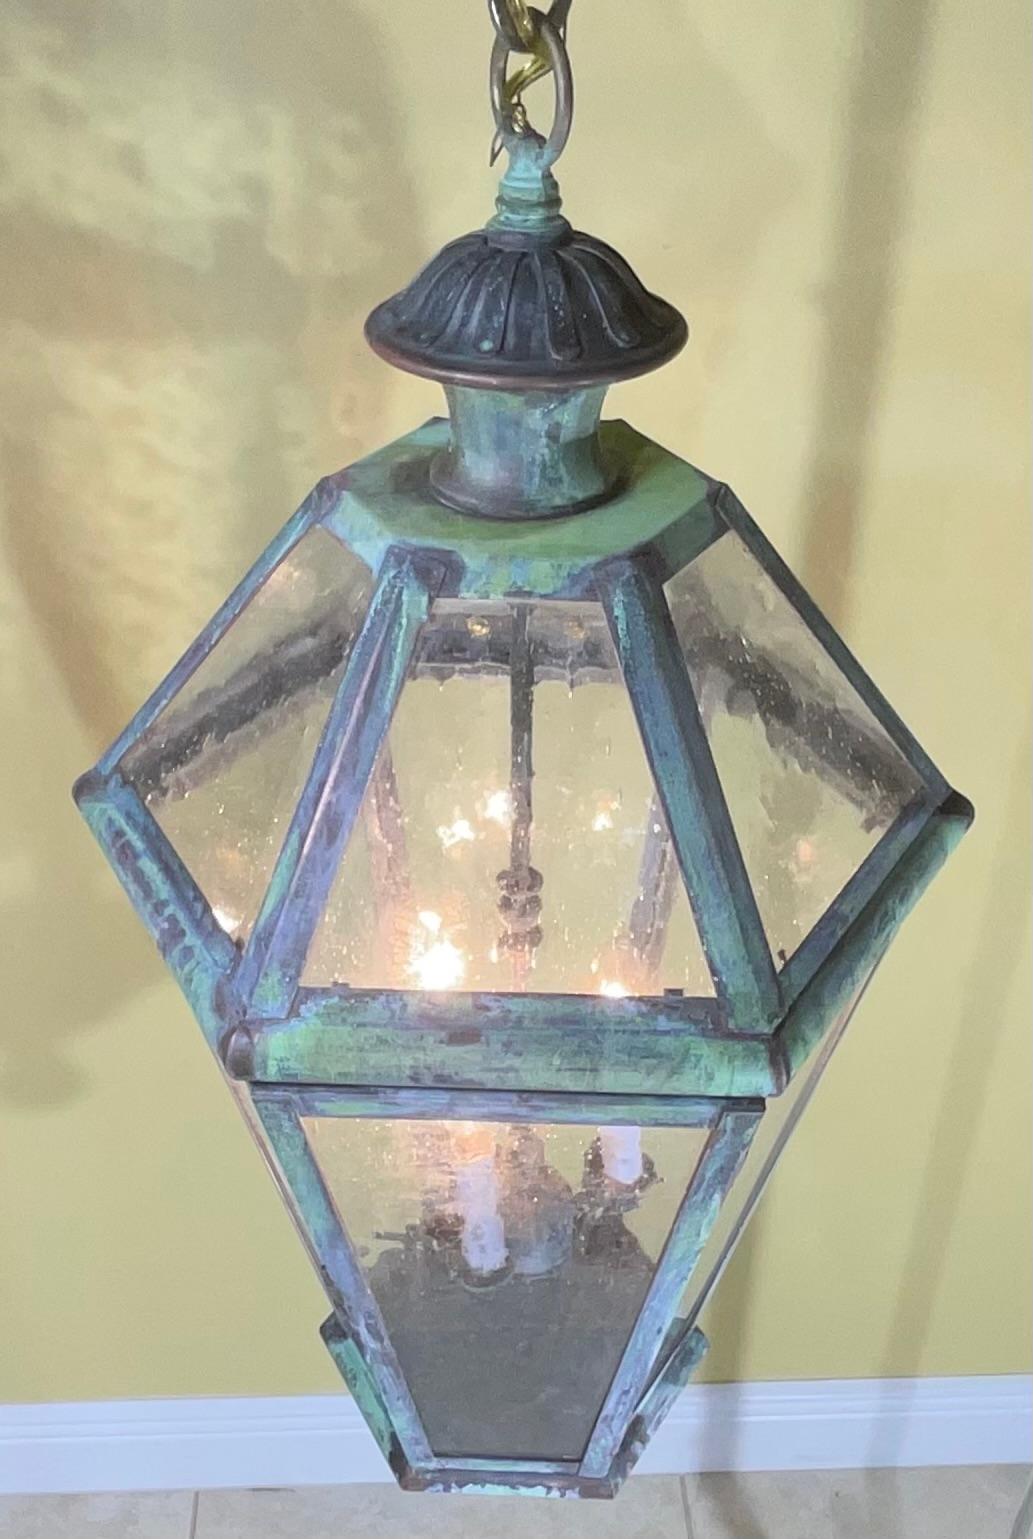 
six side hanging lantern ,made of handcrafted solid brass with three 40/watt lights, decorative seeded glass ,great light exposure , nice patina ,suitable for wet location
great look indoor outdoor.
canopy and chain included.